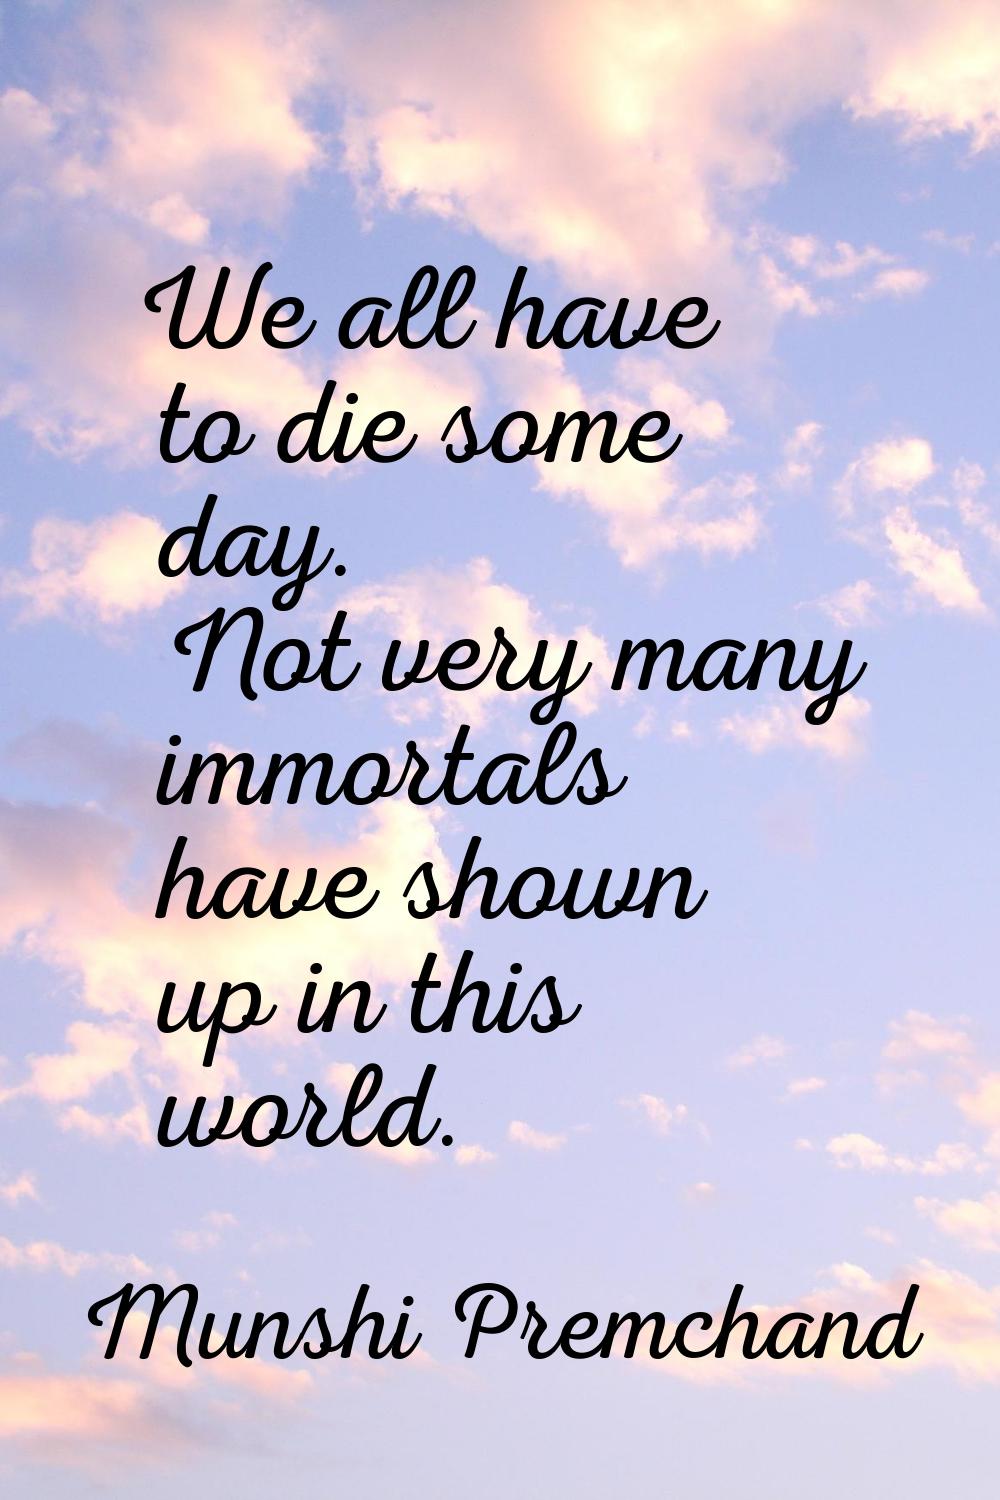 We all have to die some day. Not very many immortals have shown up in this world.